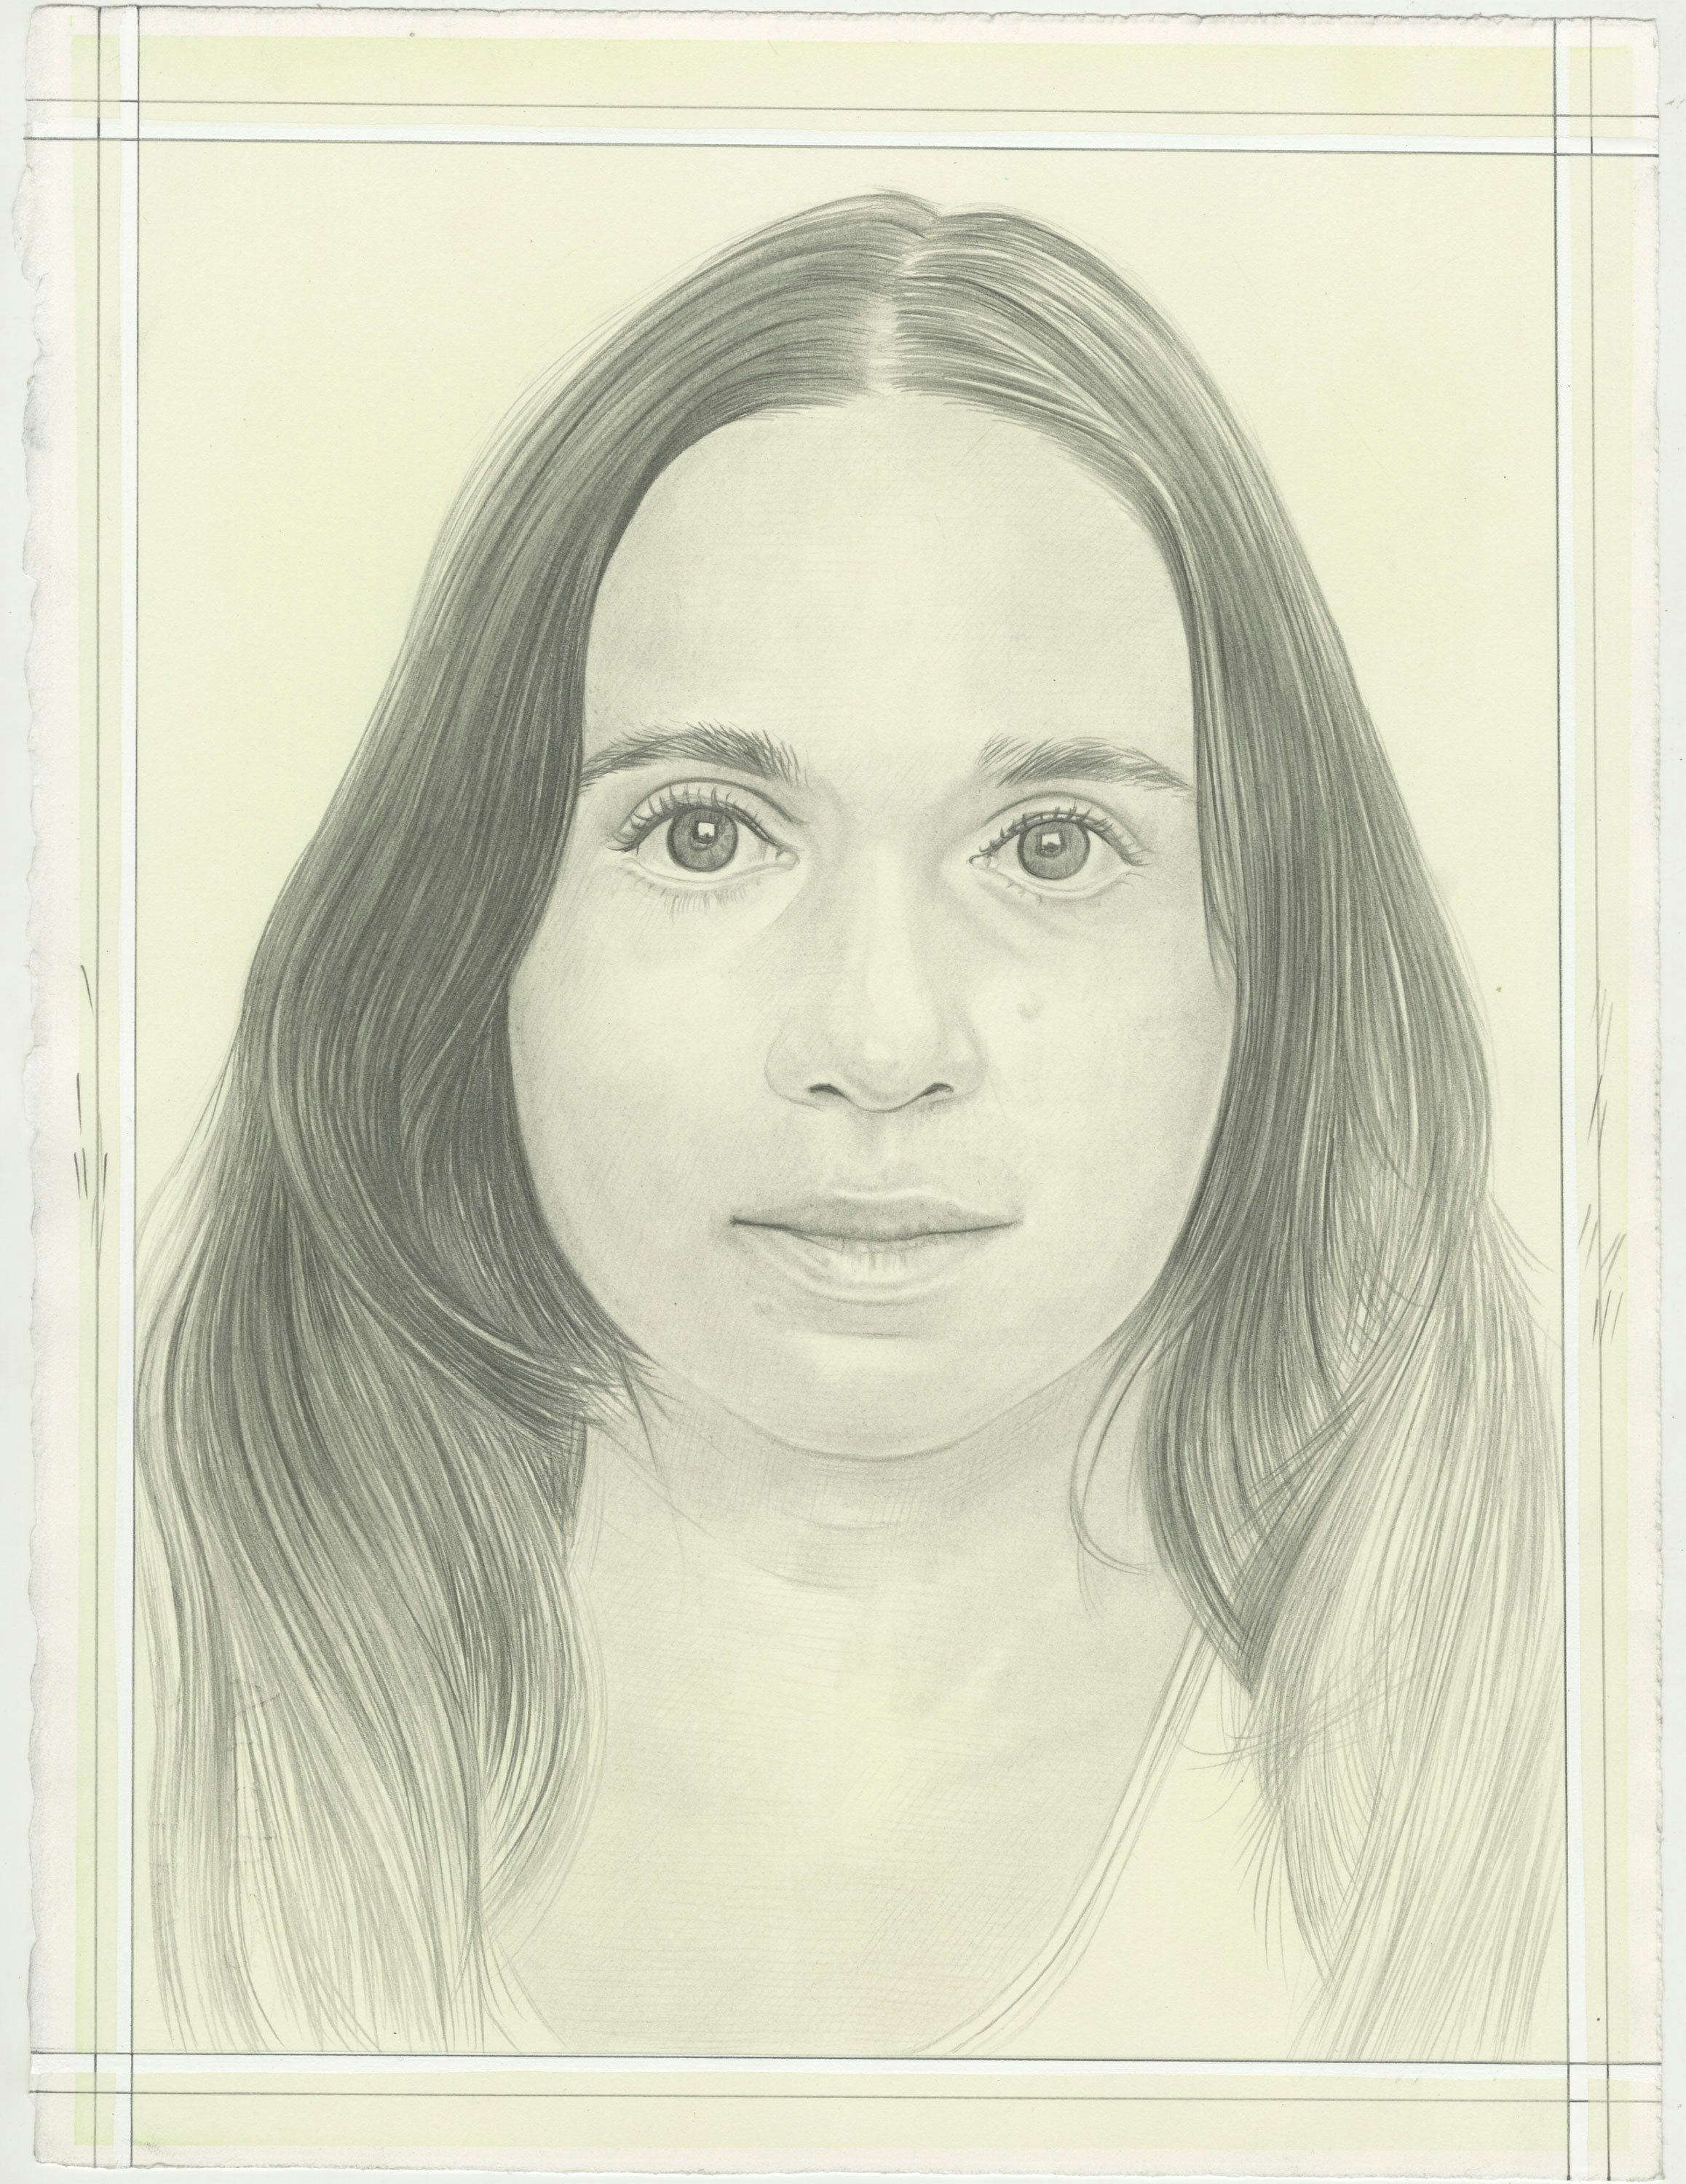 Portrait of Avery Singer, pencil on paper by Phong H. Bui.